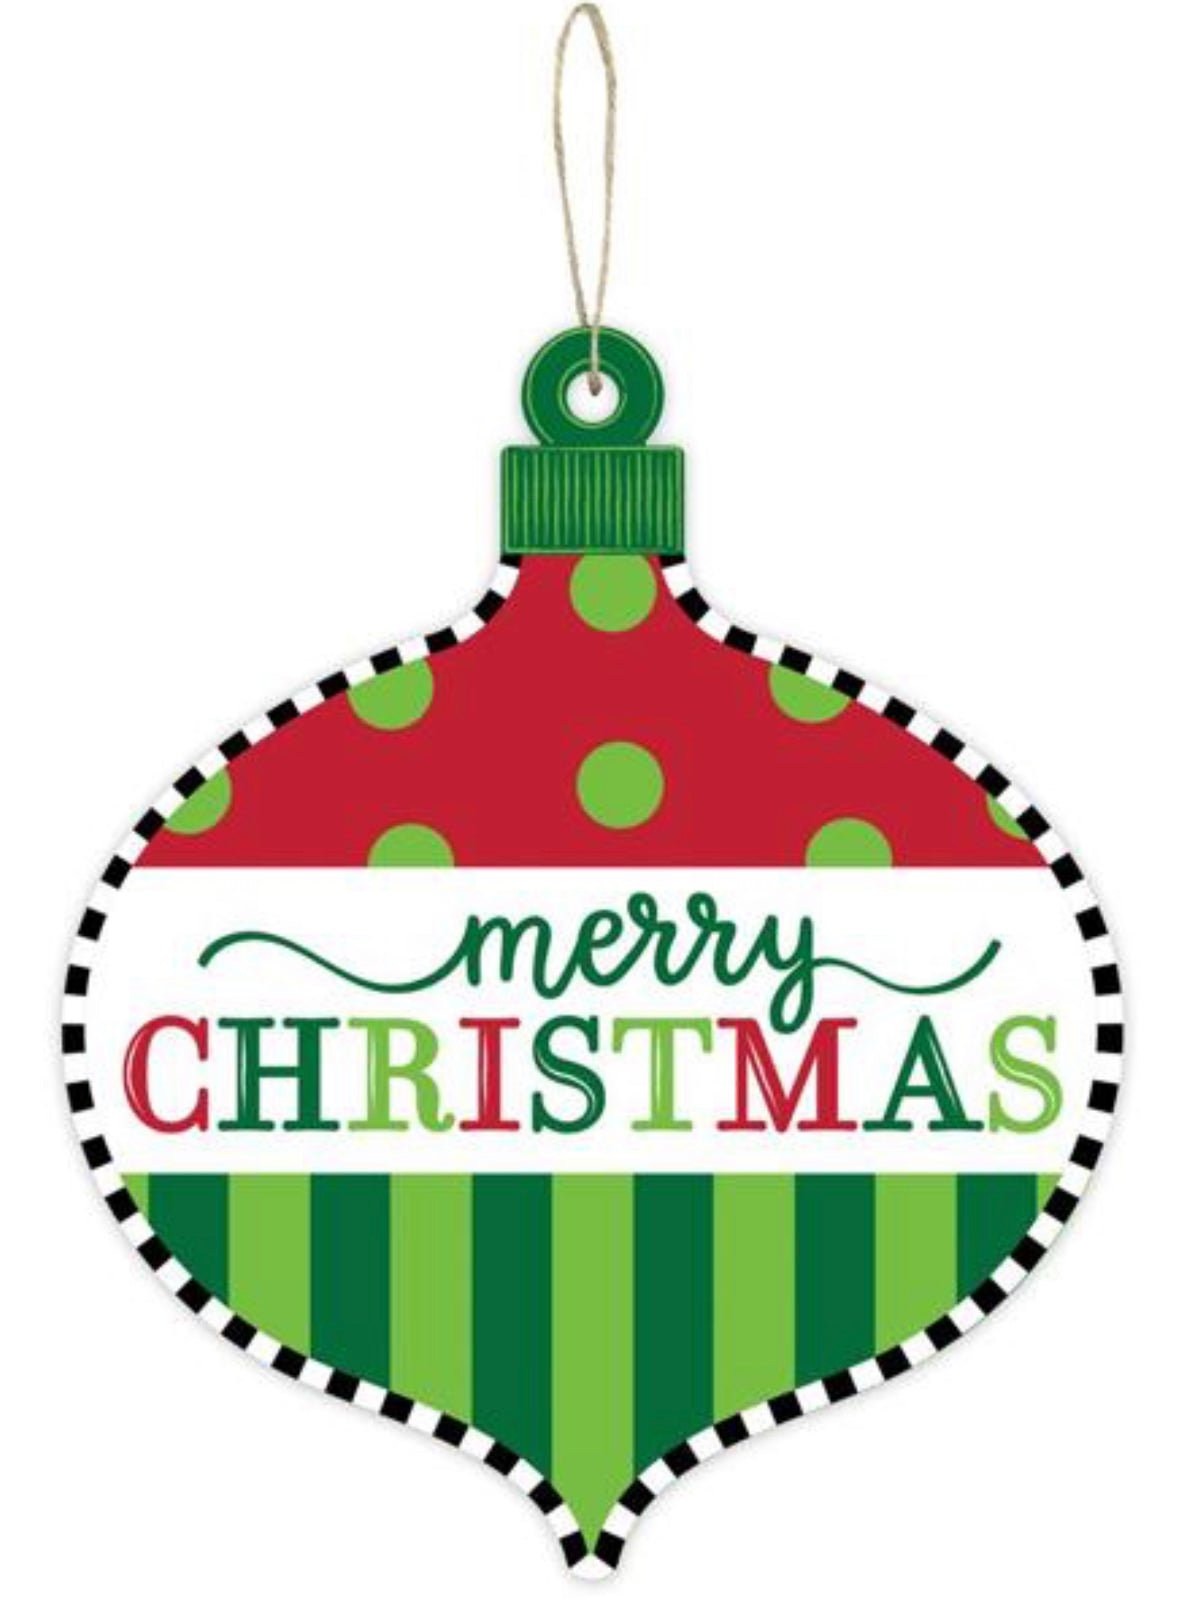 Merry Christmas ornament sign - Greenery Marketsigns for wreathsAP7159